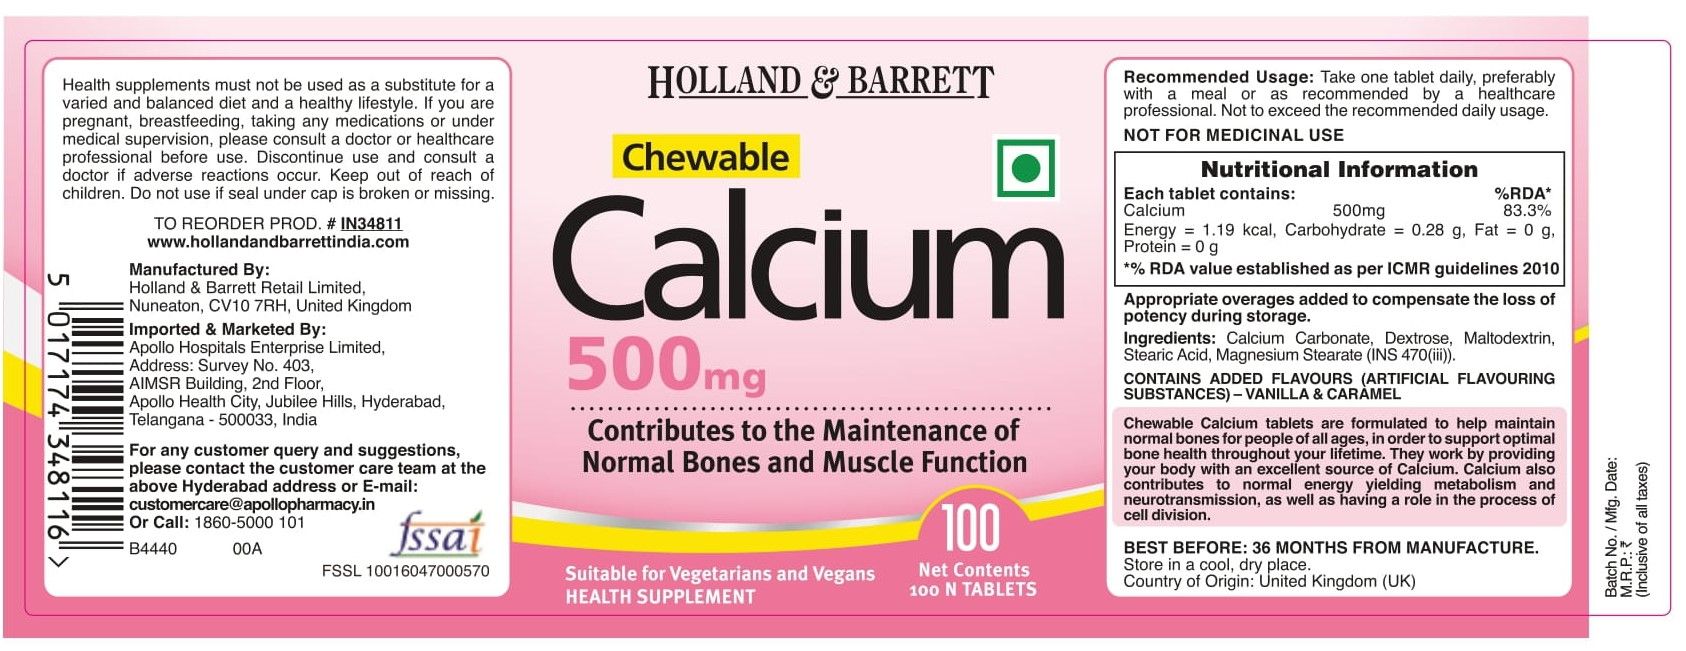 Holland & Barrett Calcium 500 mg, 100 Chewable Tablets, Pack of 1 